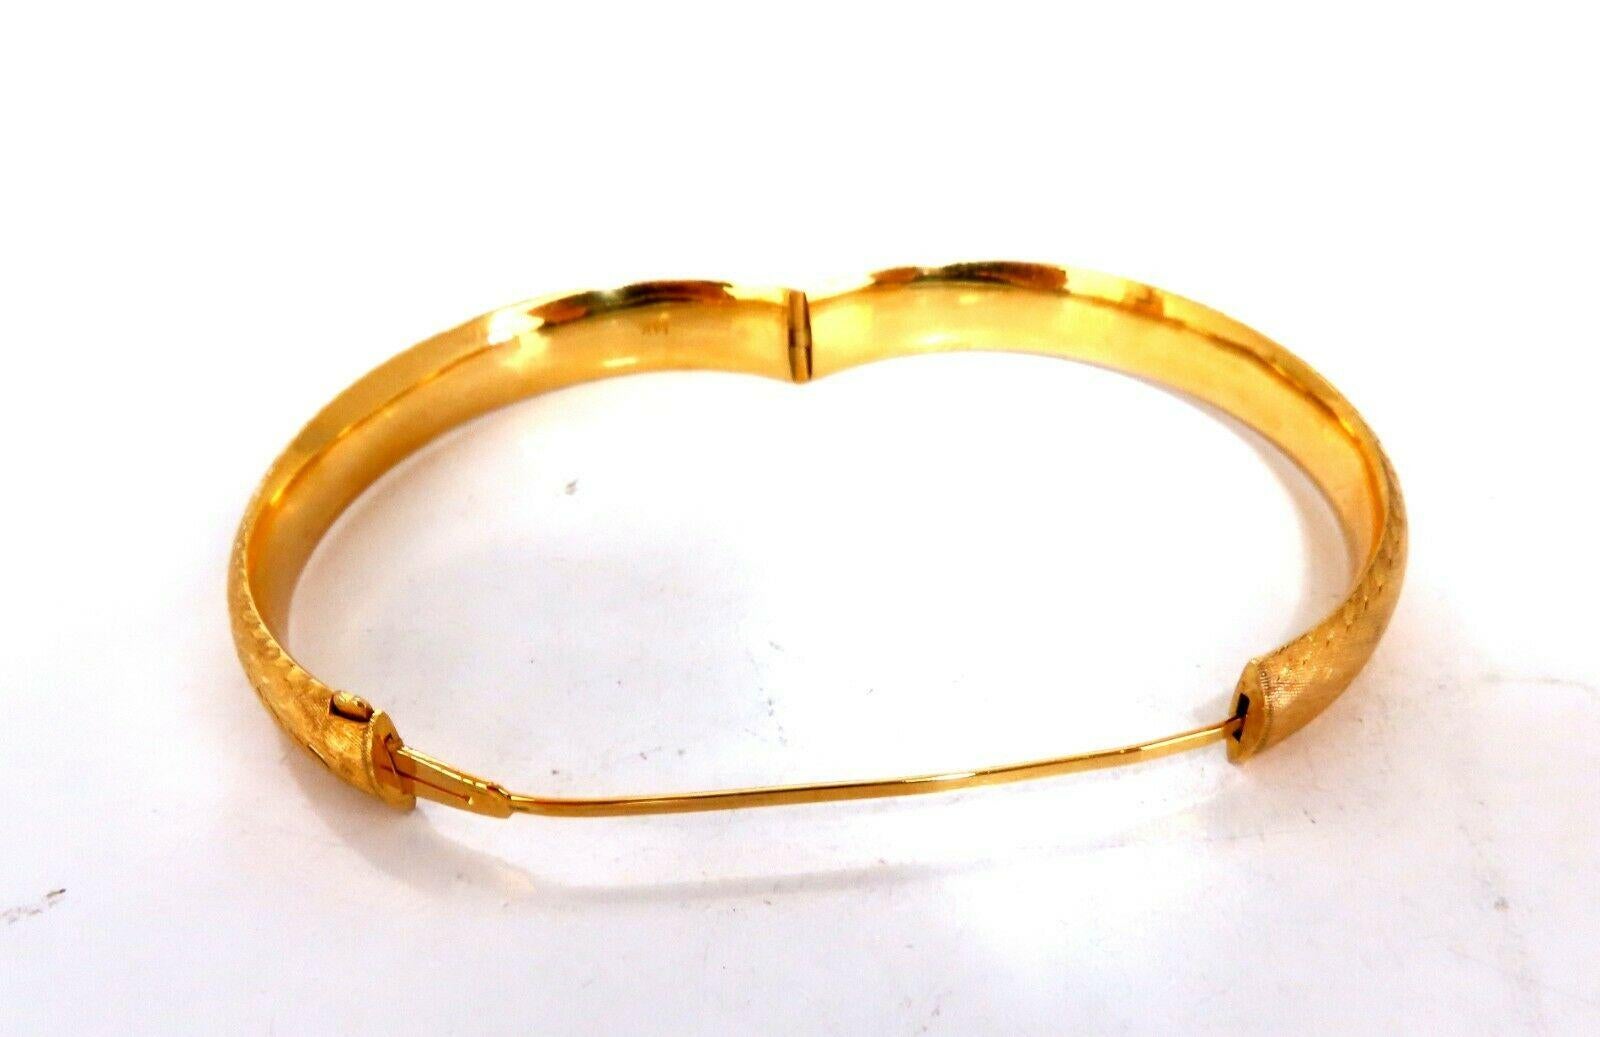 Beautiful Ladies Graver Etching Gilt Deco Bangle 

Slight raised dome

Button release / Snap closure

14kt. yellow gold 

16 Grams.

7 Inches (wearable length)

Bangle measures:
.39 inch wide
.17 inch depth
2.5 inches east to west
2.6 inches north